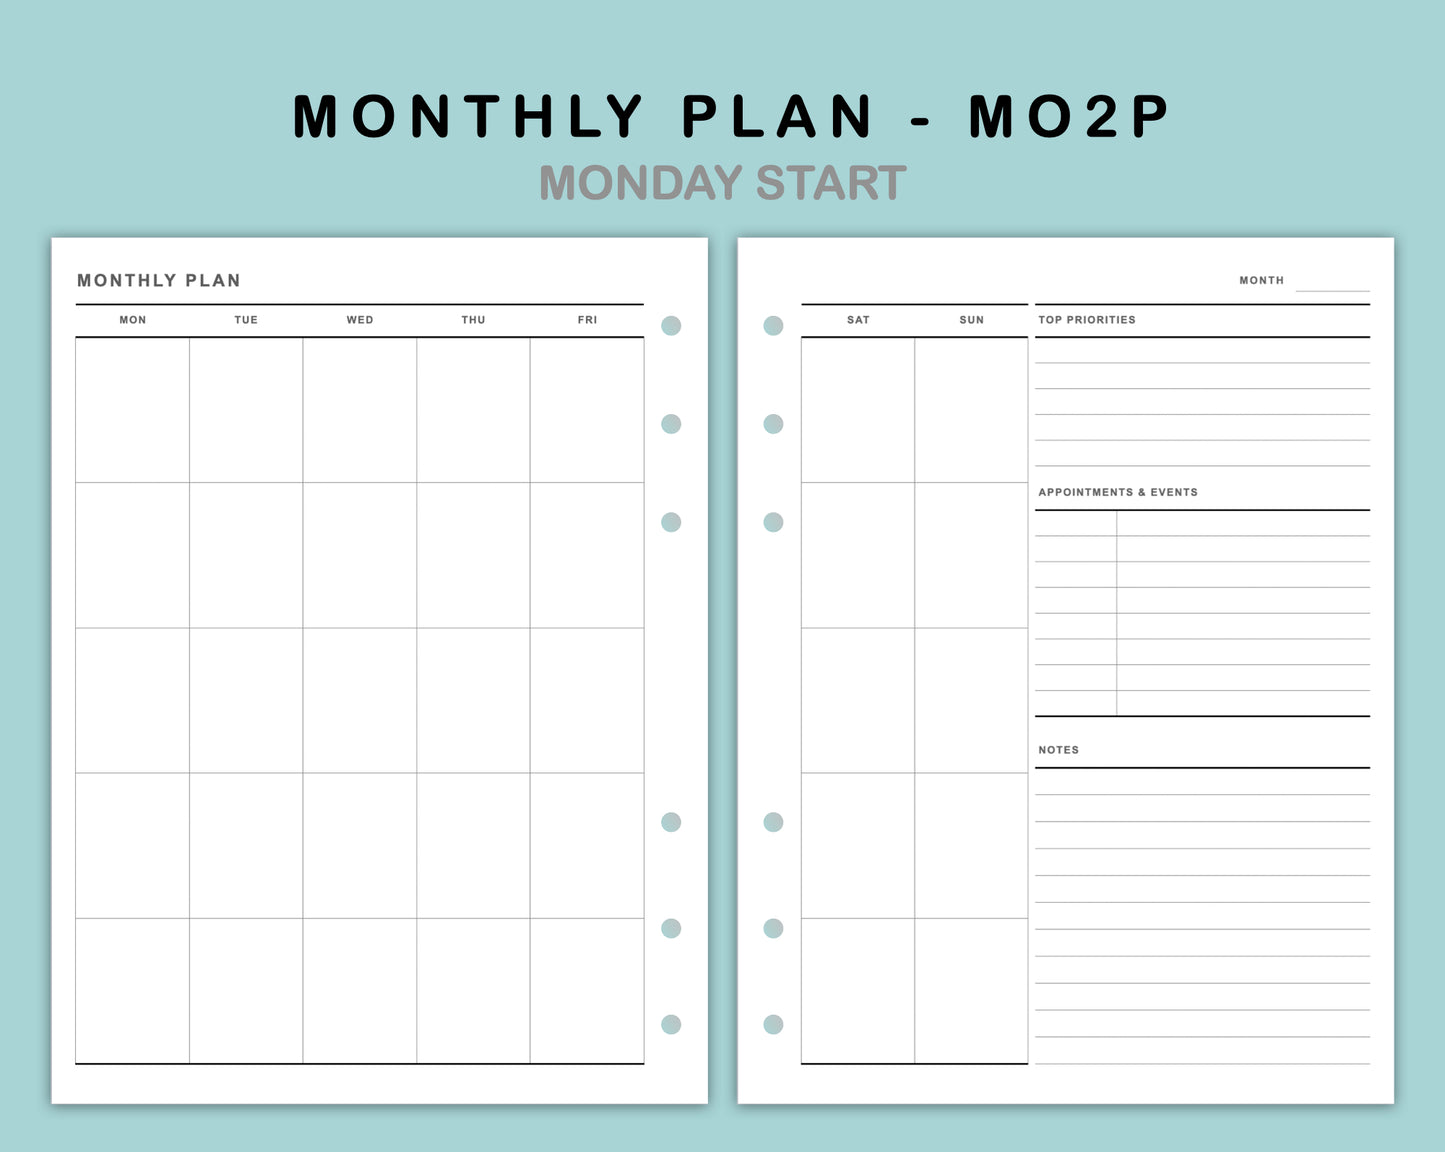 B6 Wide Inserts - Monthly Plan - MO2P - with Top Priority